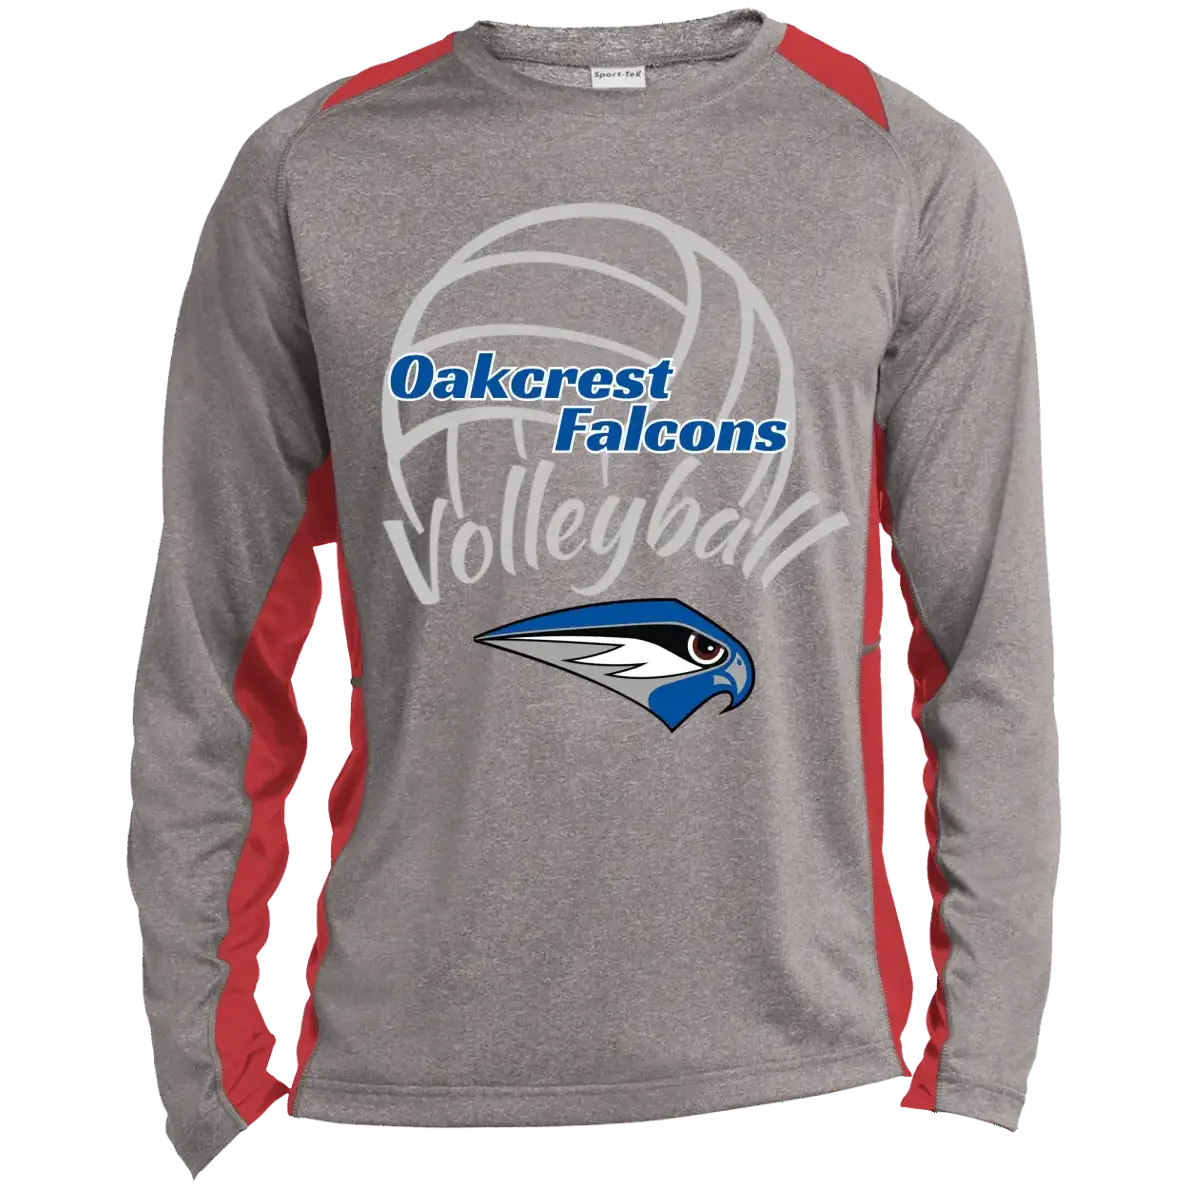 OHS Volleyball Long Sleeve Tees (Men's and Women's Choices)